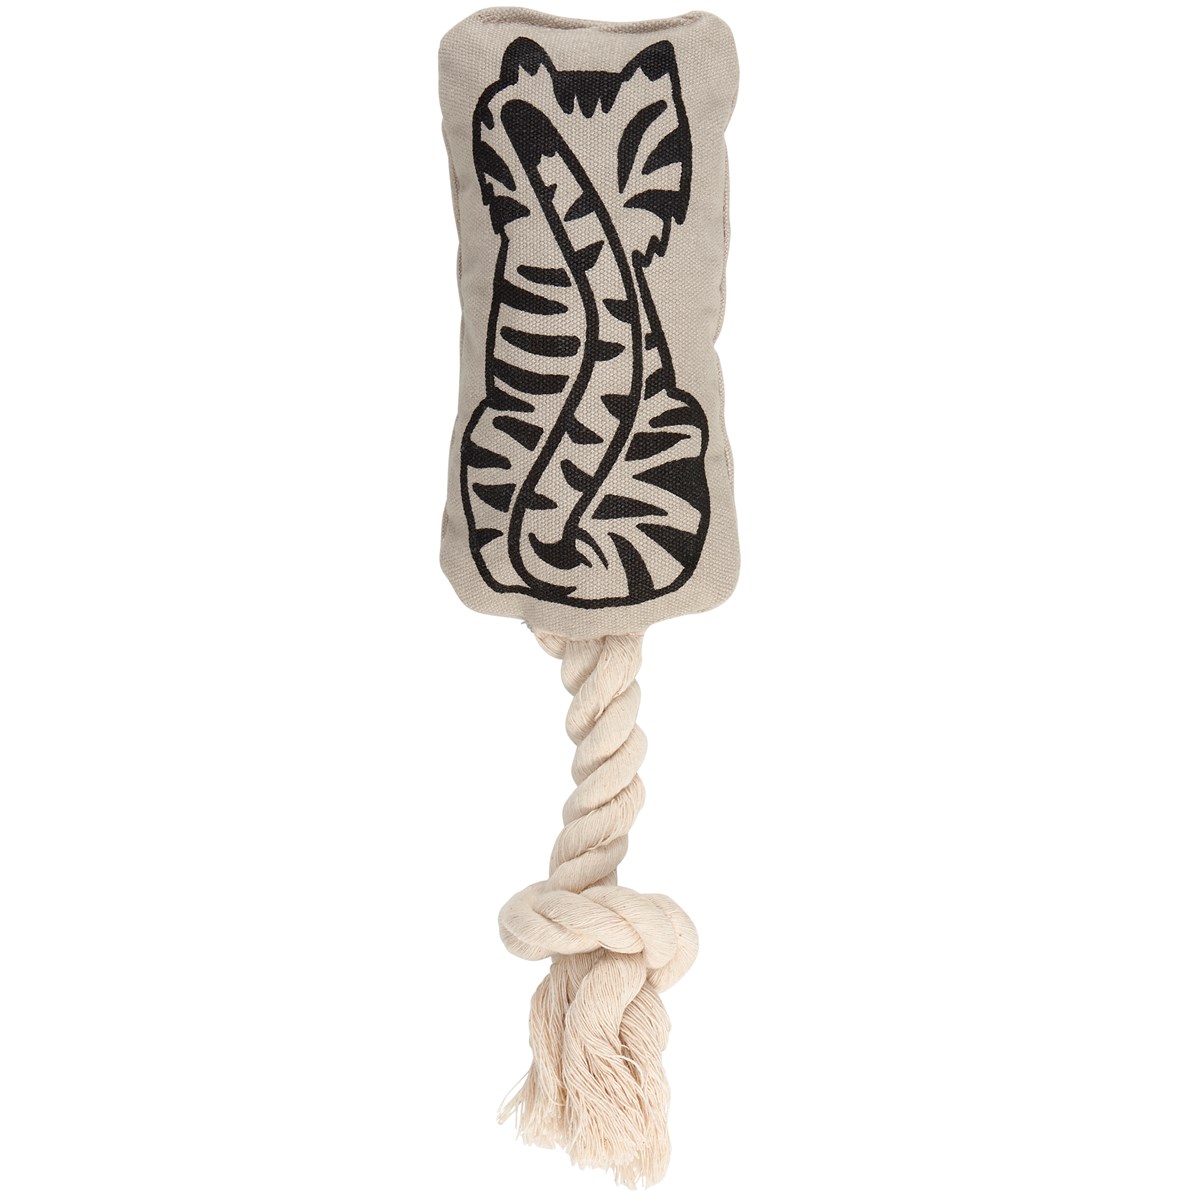 Cat Dog Toy - Cotton, Rope